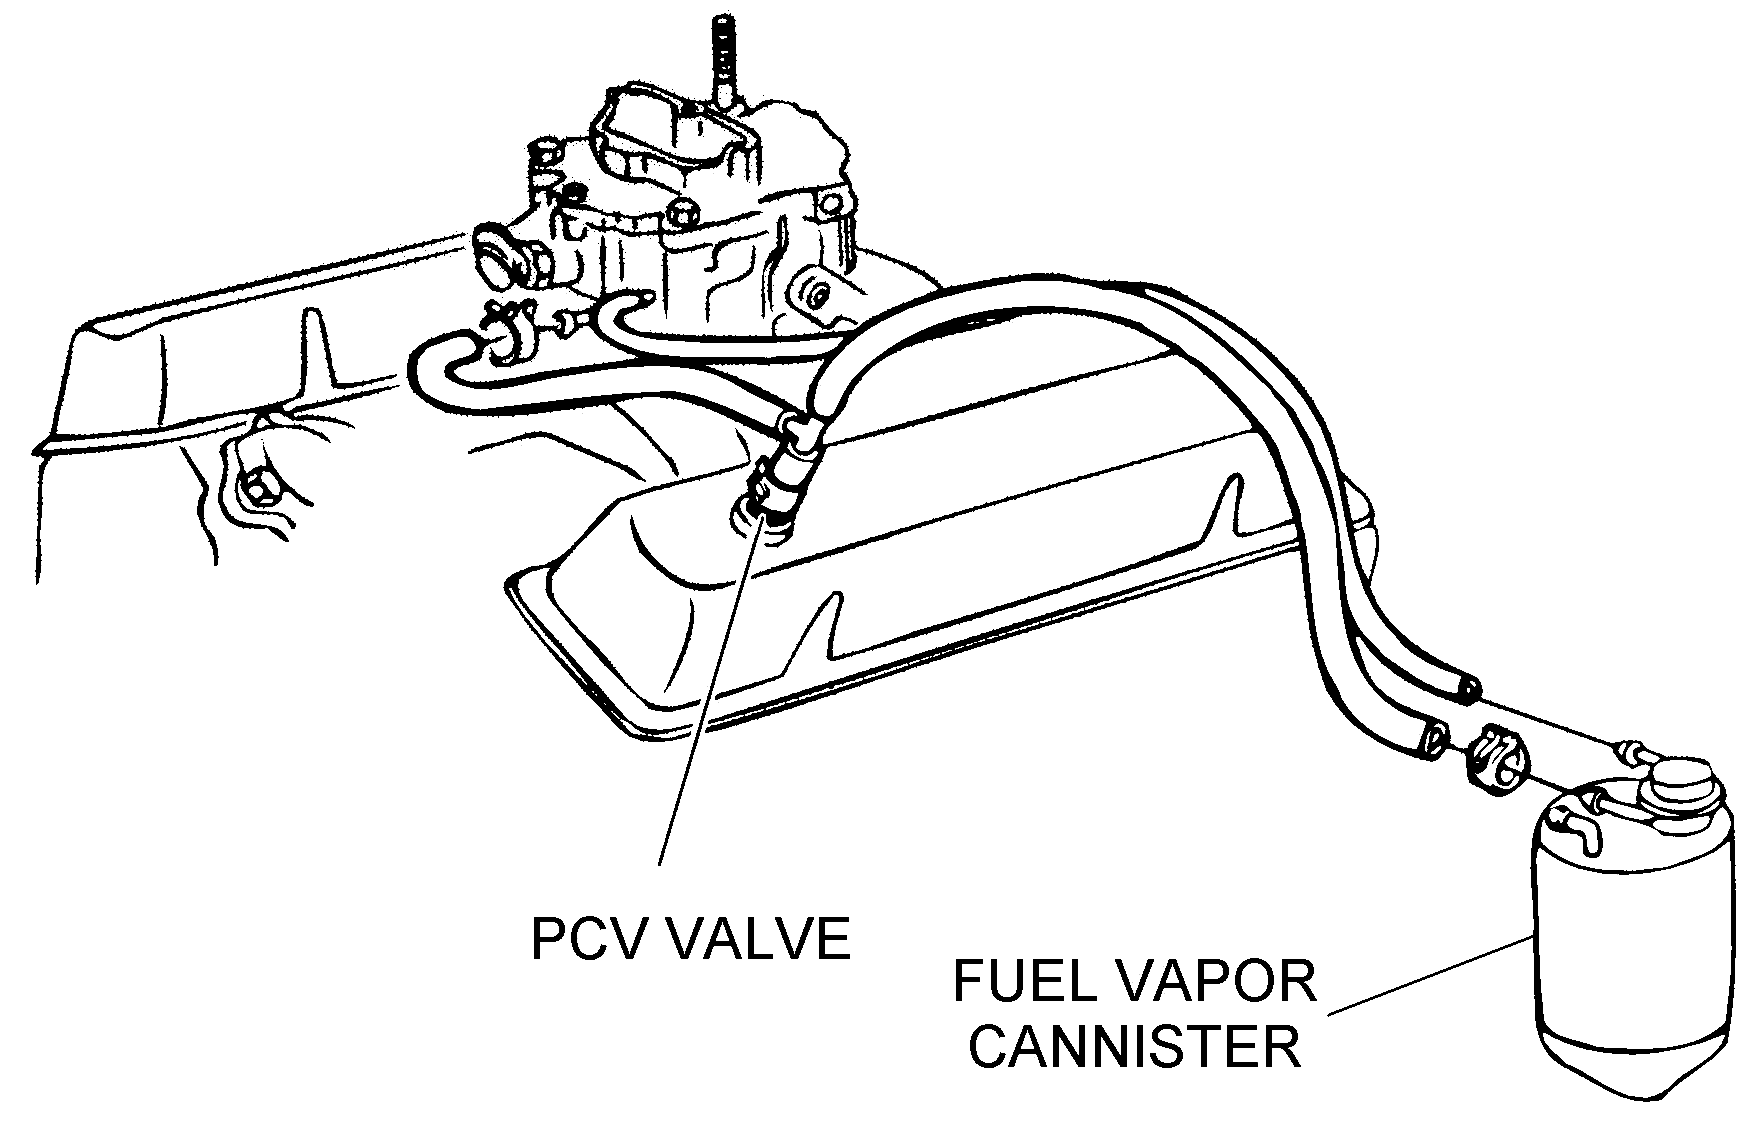 Fuel Vapor Canister Assembly - Diagram View